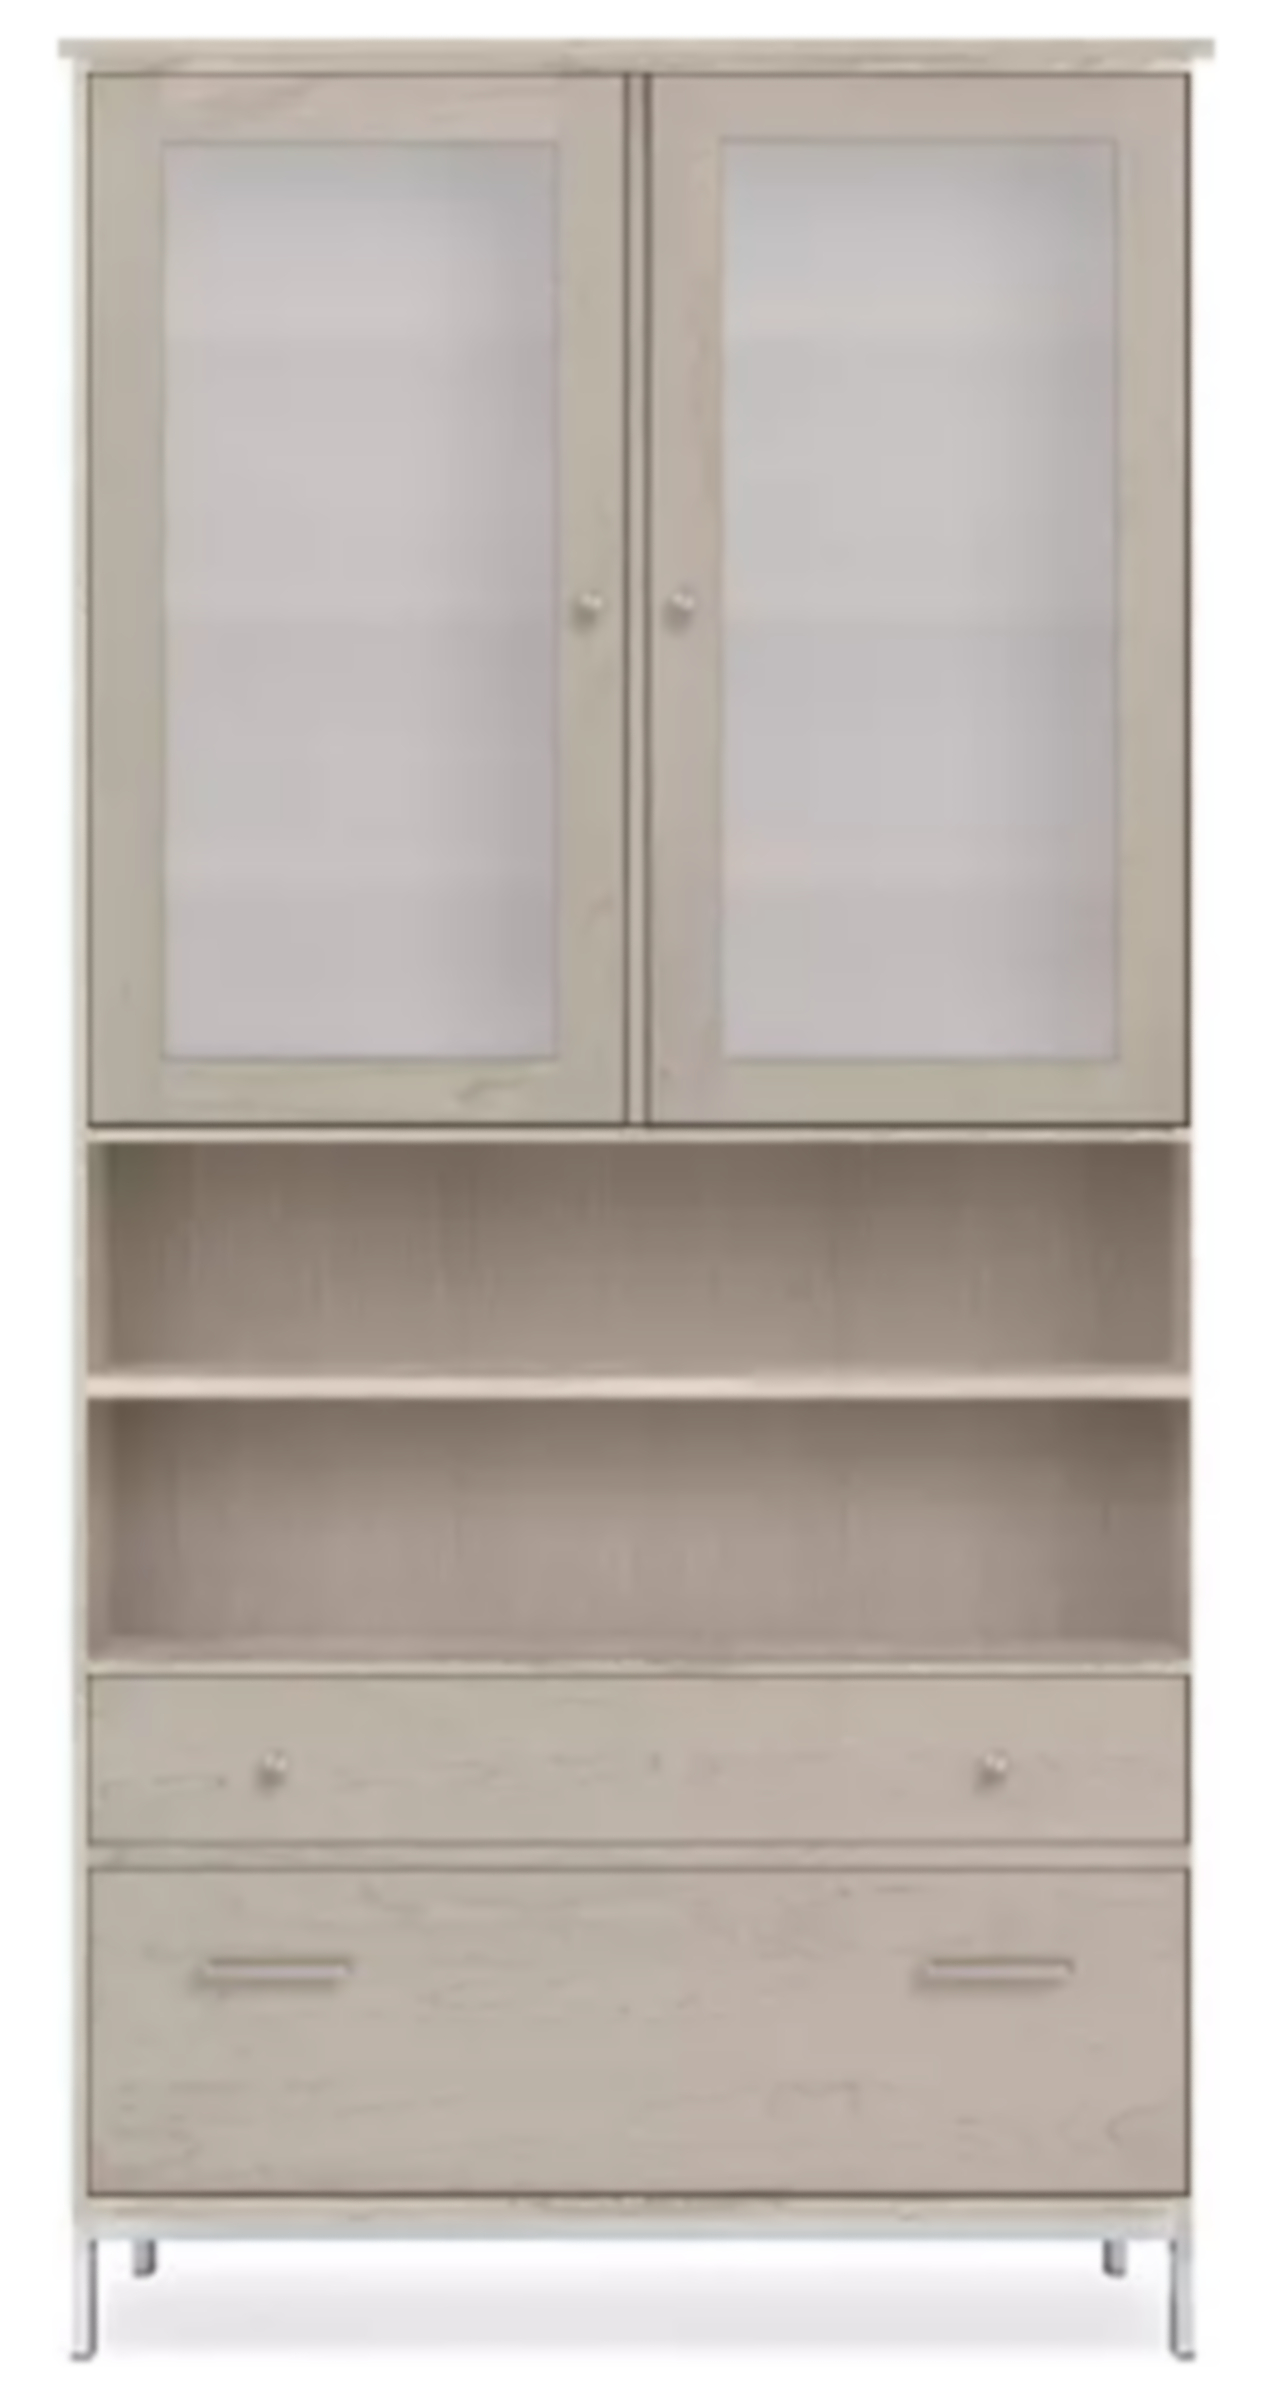 Linear 40w 20d 84h Cabinet in Shell with Stainless Steel